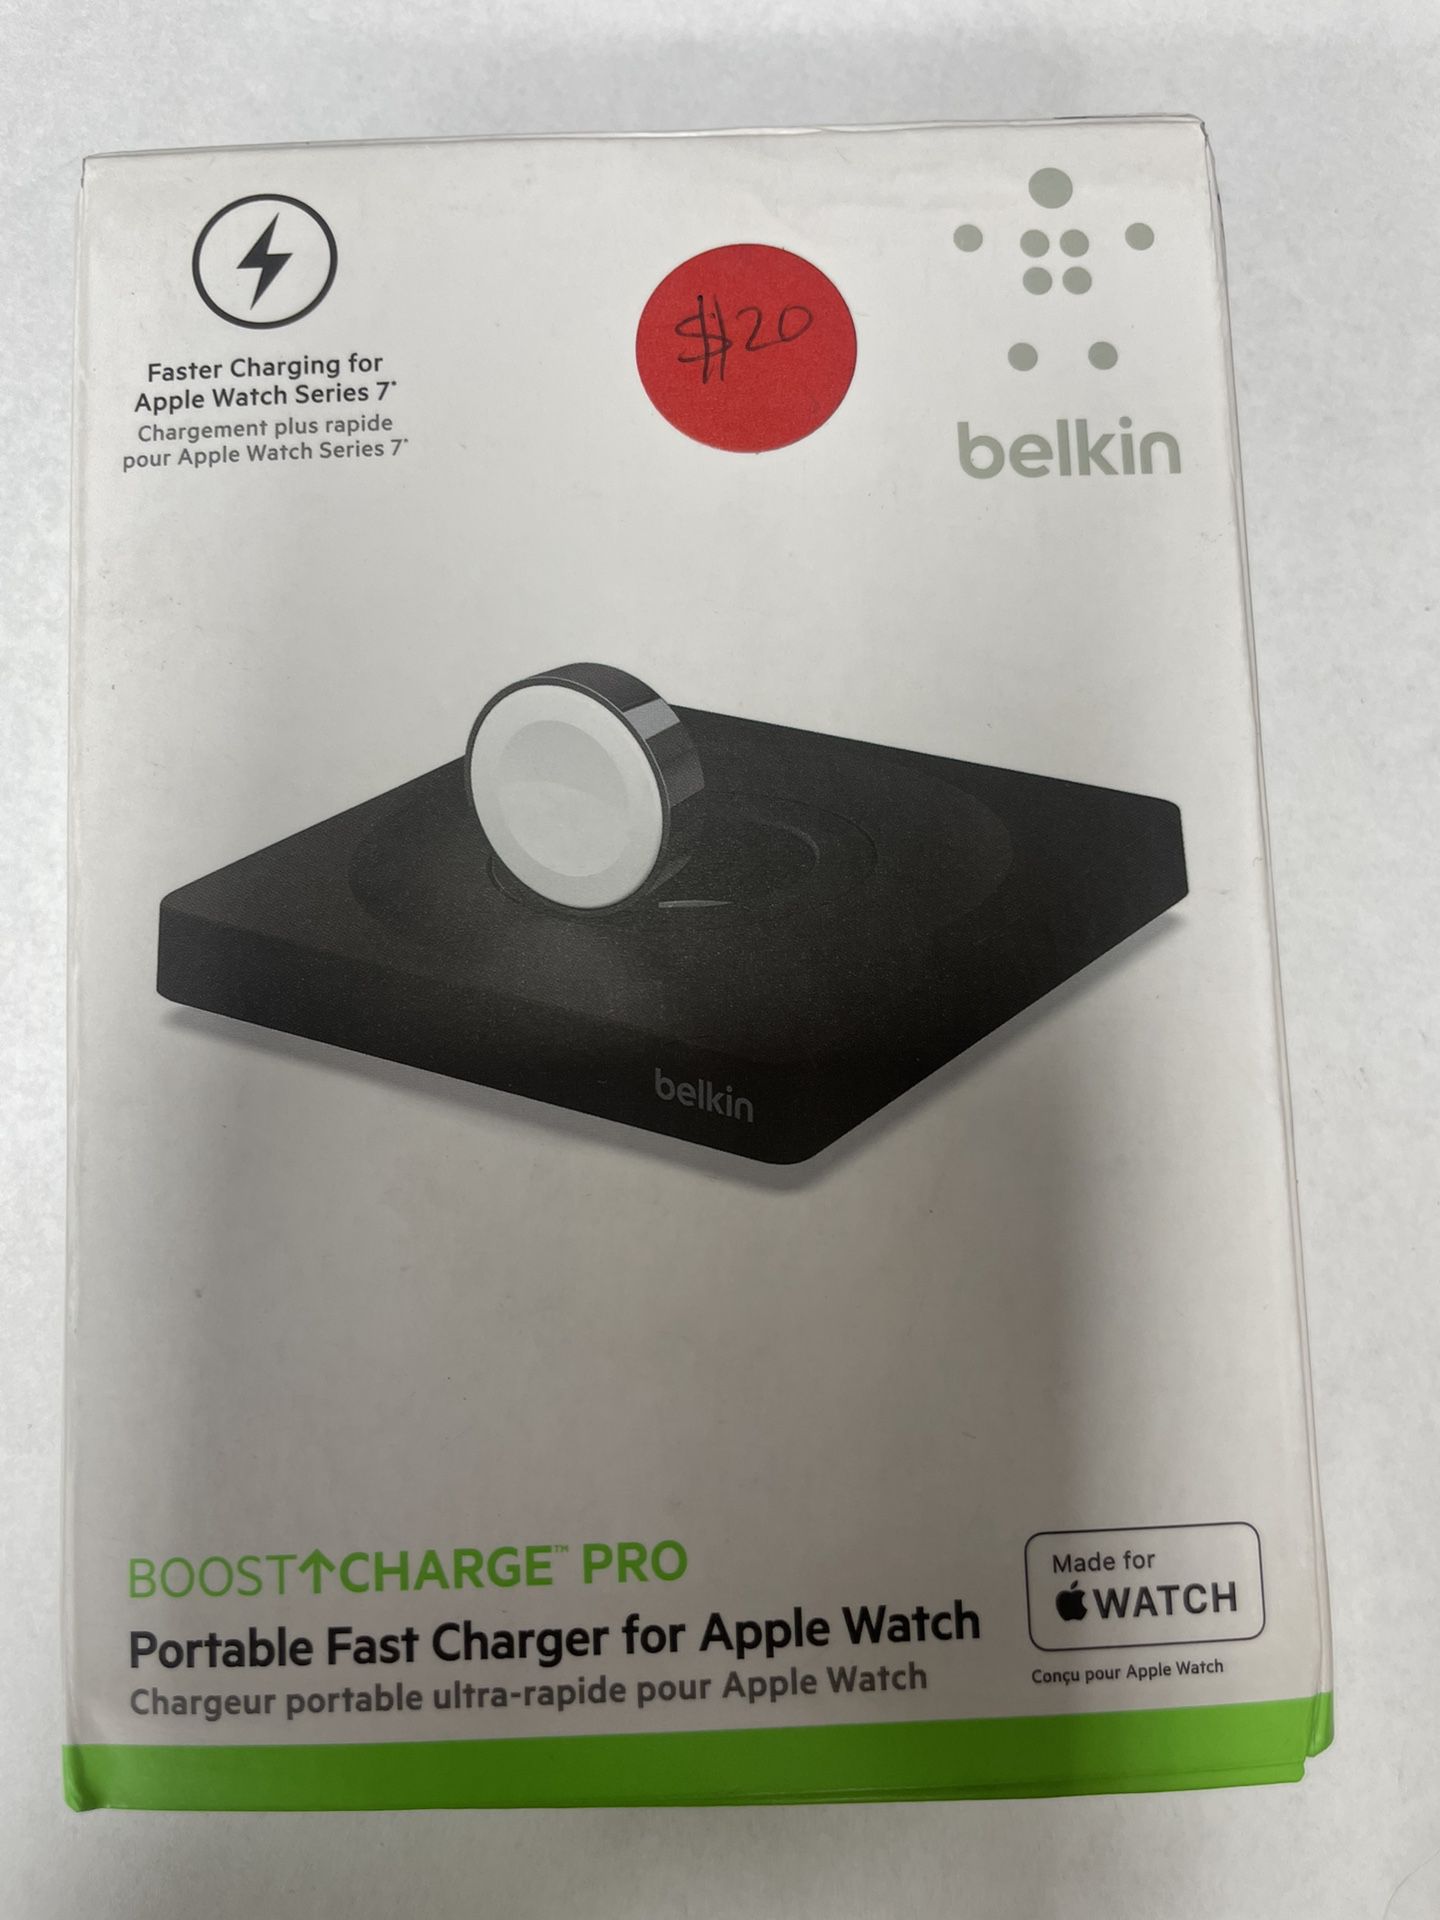 belkin portable fast charger apple watch very fast